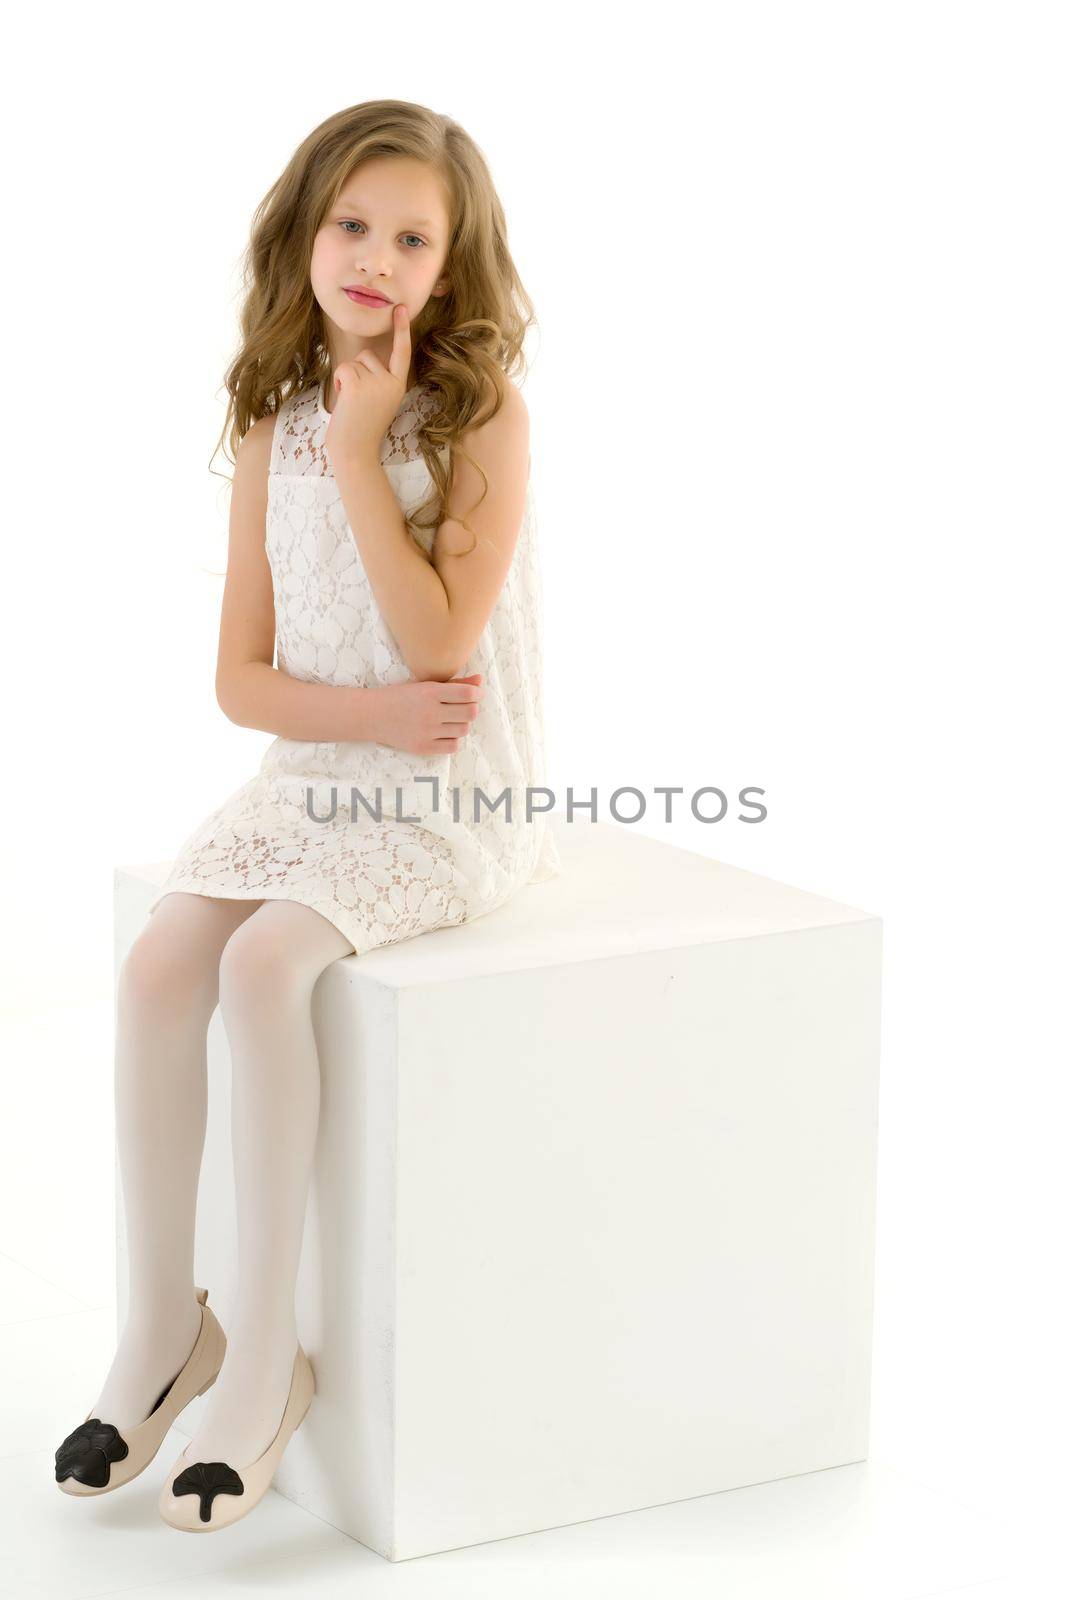 Beautiful Blonde Girl in Elegant Ivory Dress Sitting on White Cube in Studio, Portrait of Cheerful Long Haired Girl Wearing Fashionable Stylish Clothes Posing in Front of Camera Against White Background